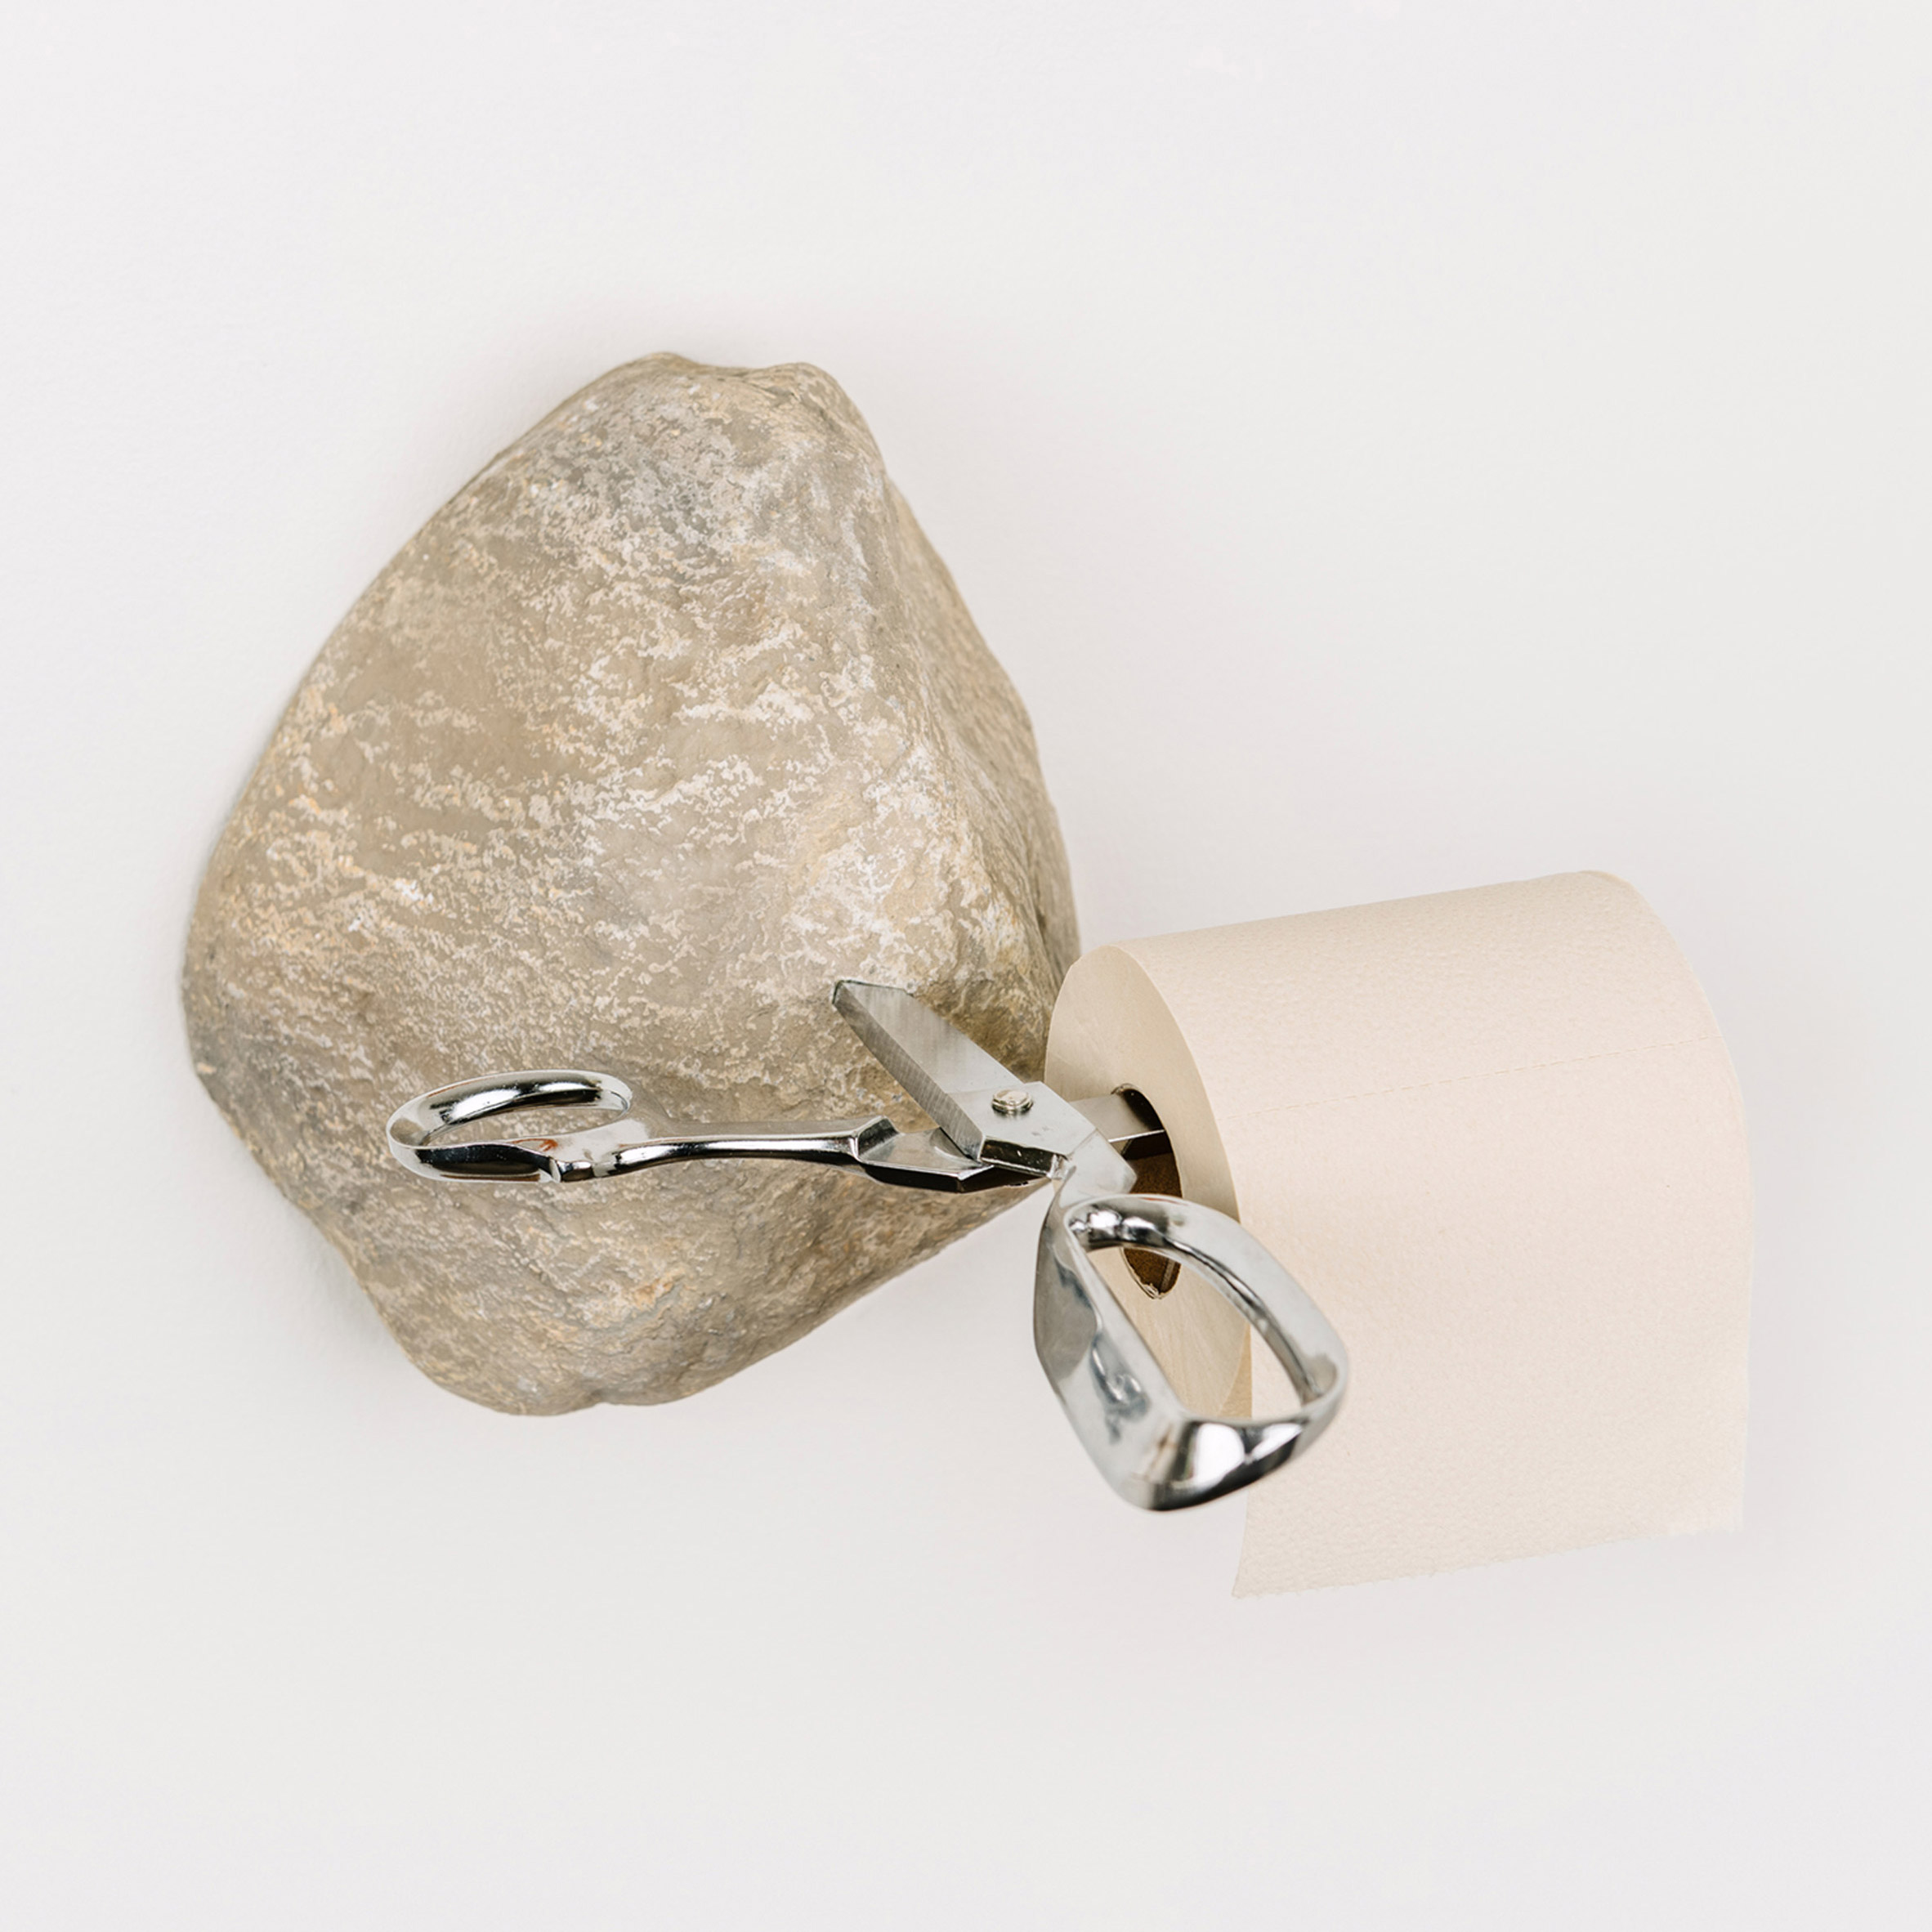 Ten designs that reimagine the humble toilet roll holder